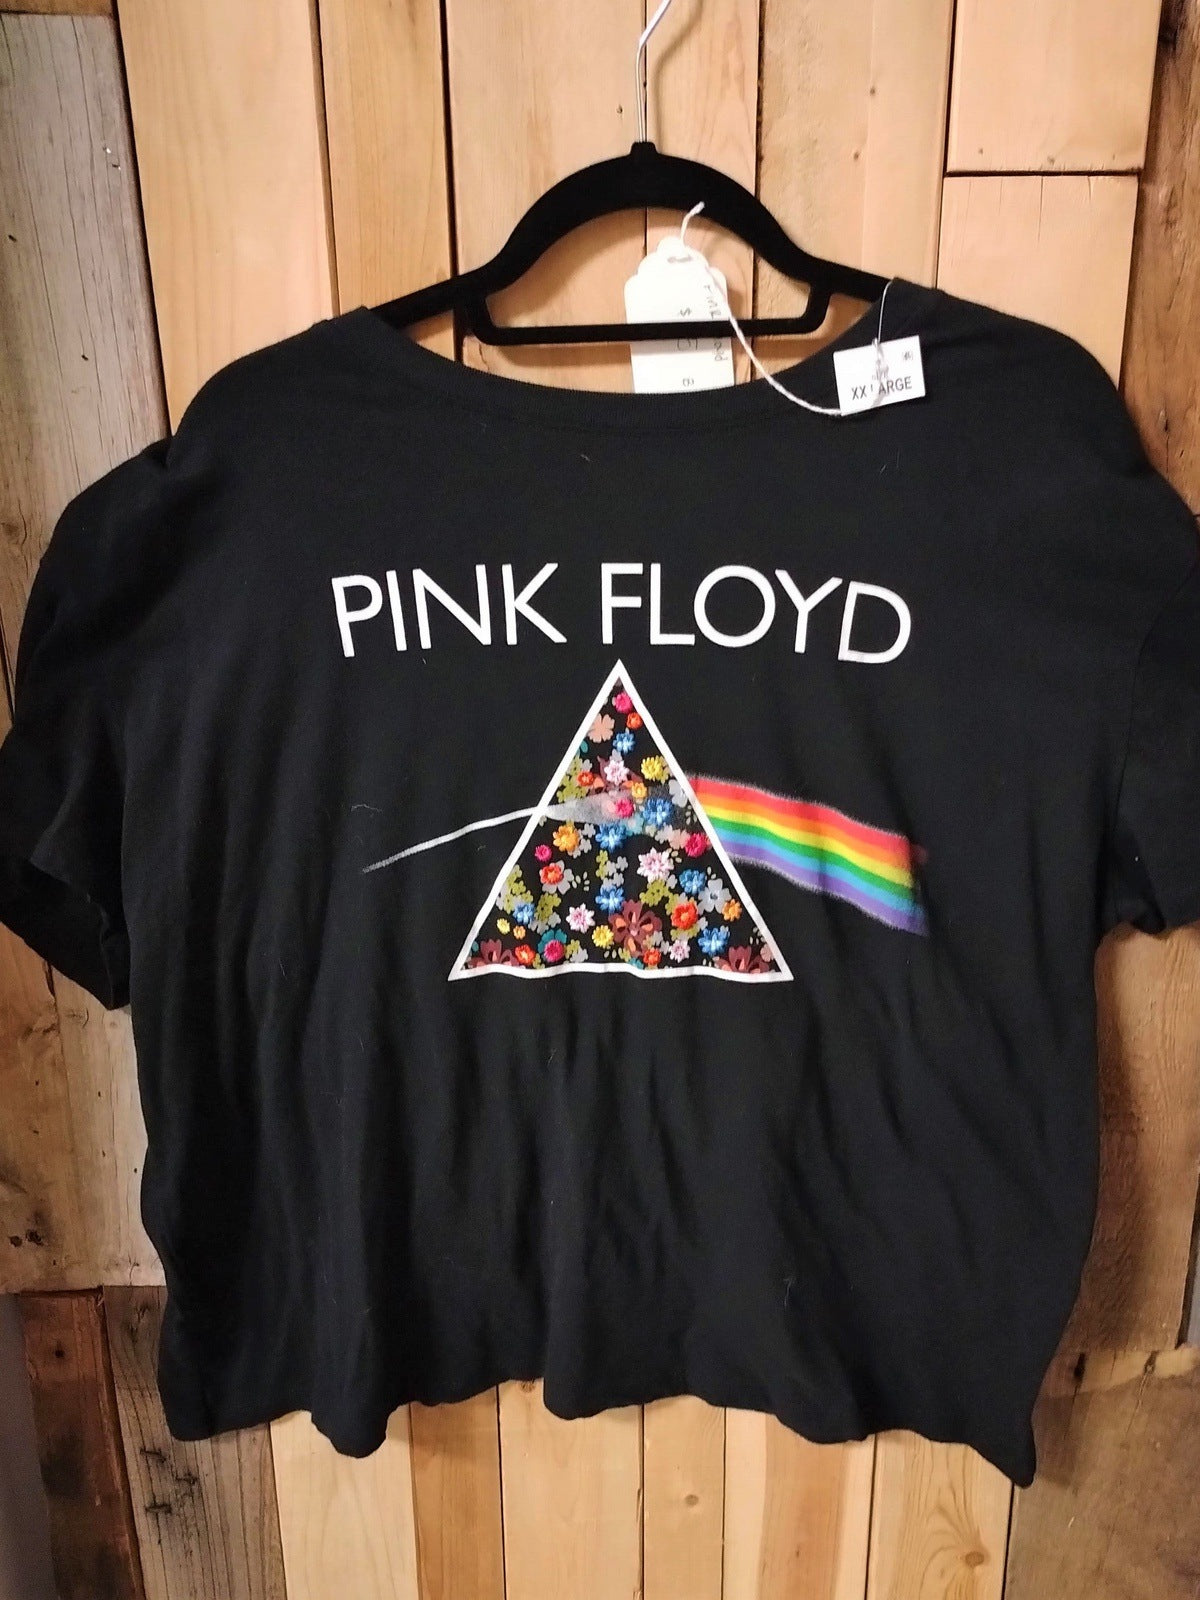 Pink Floyd "Dark Side of the Moon" Flower Prism Women's T Shirt XXL NEW with Tags